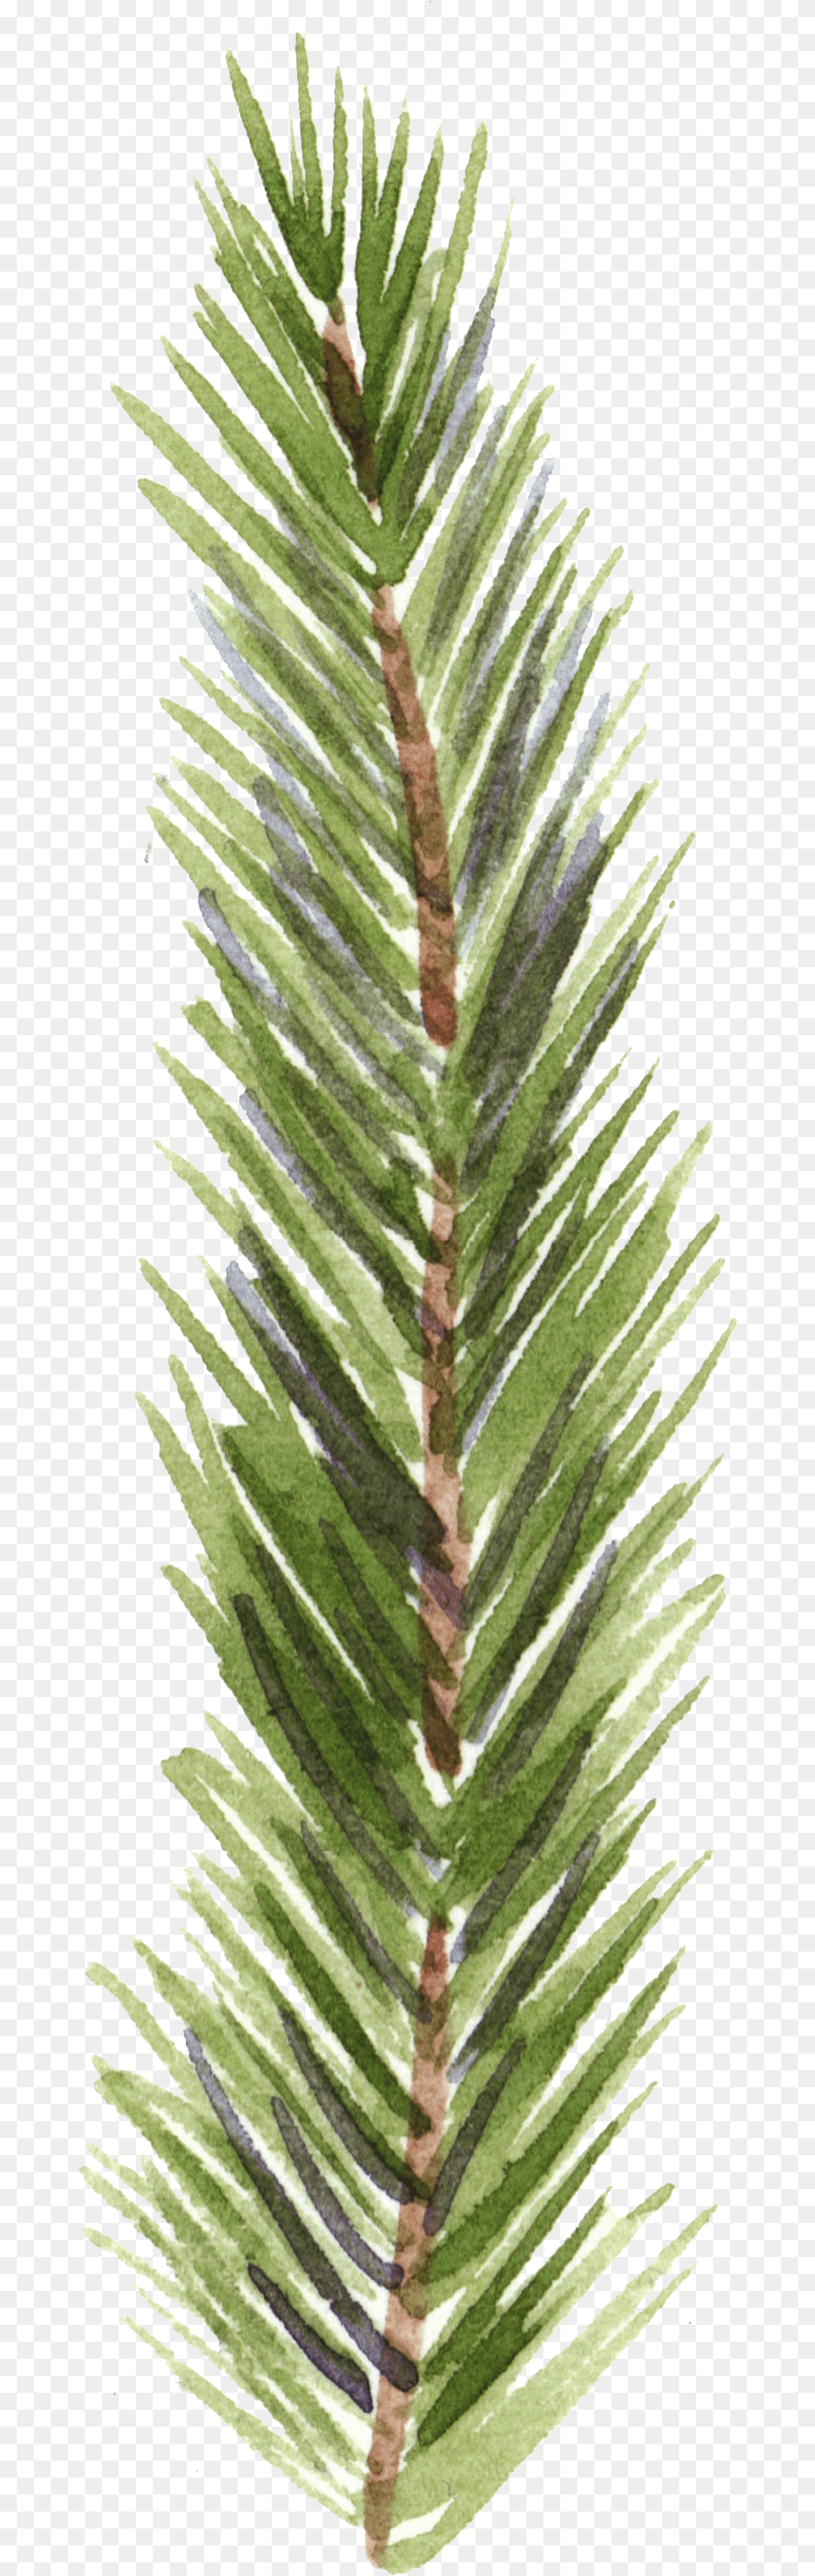 Hand Painted Realistic Pine Branches Decorative Painting, Conifer, Fir, Grass, Leaf Png Image